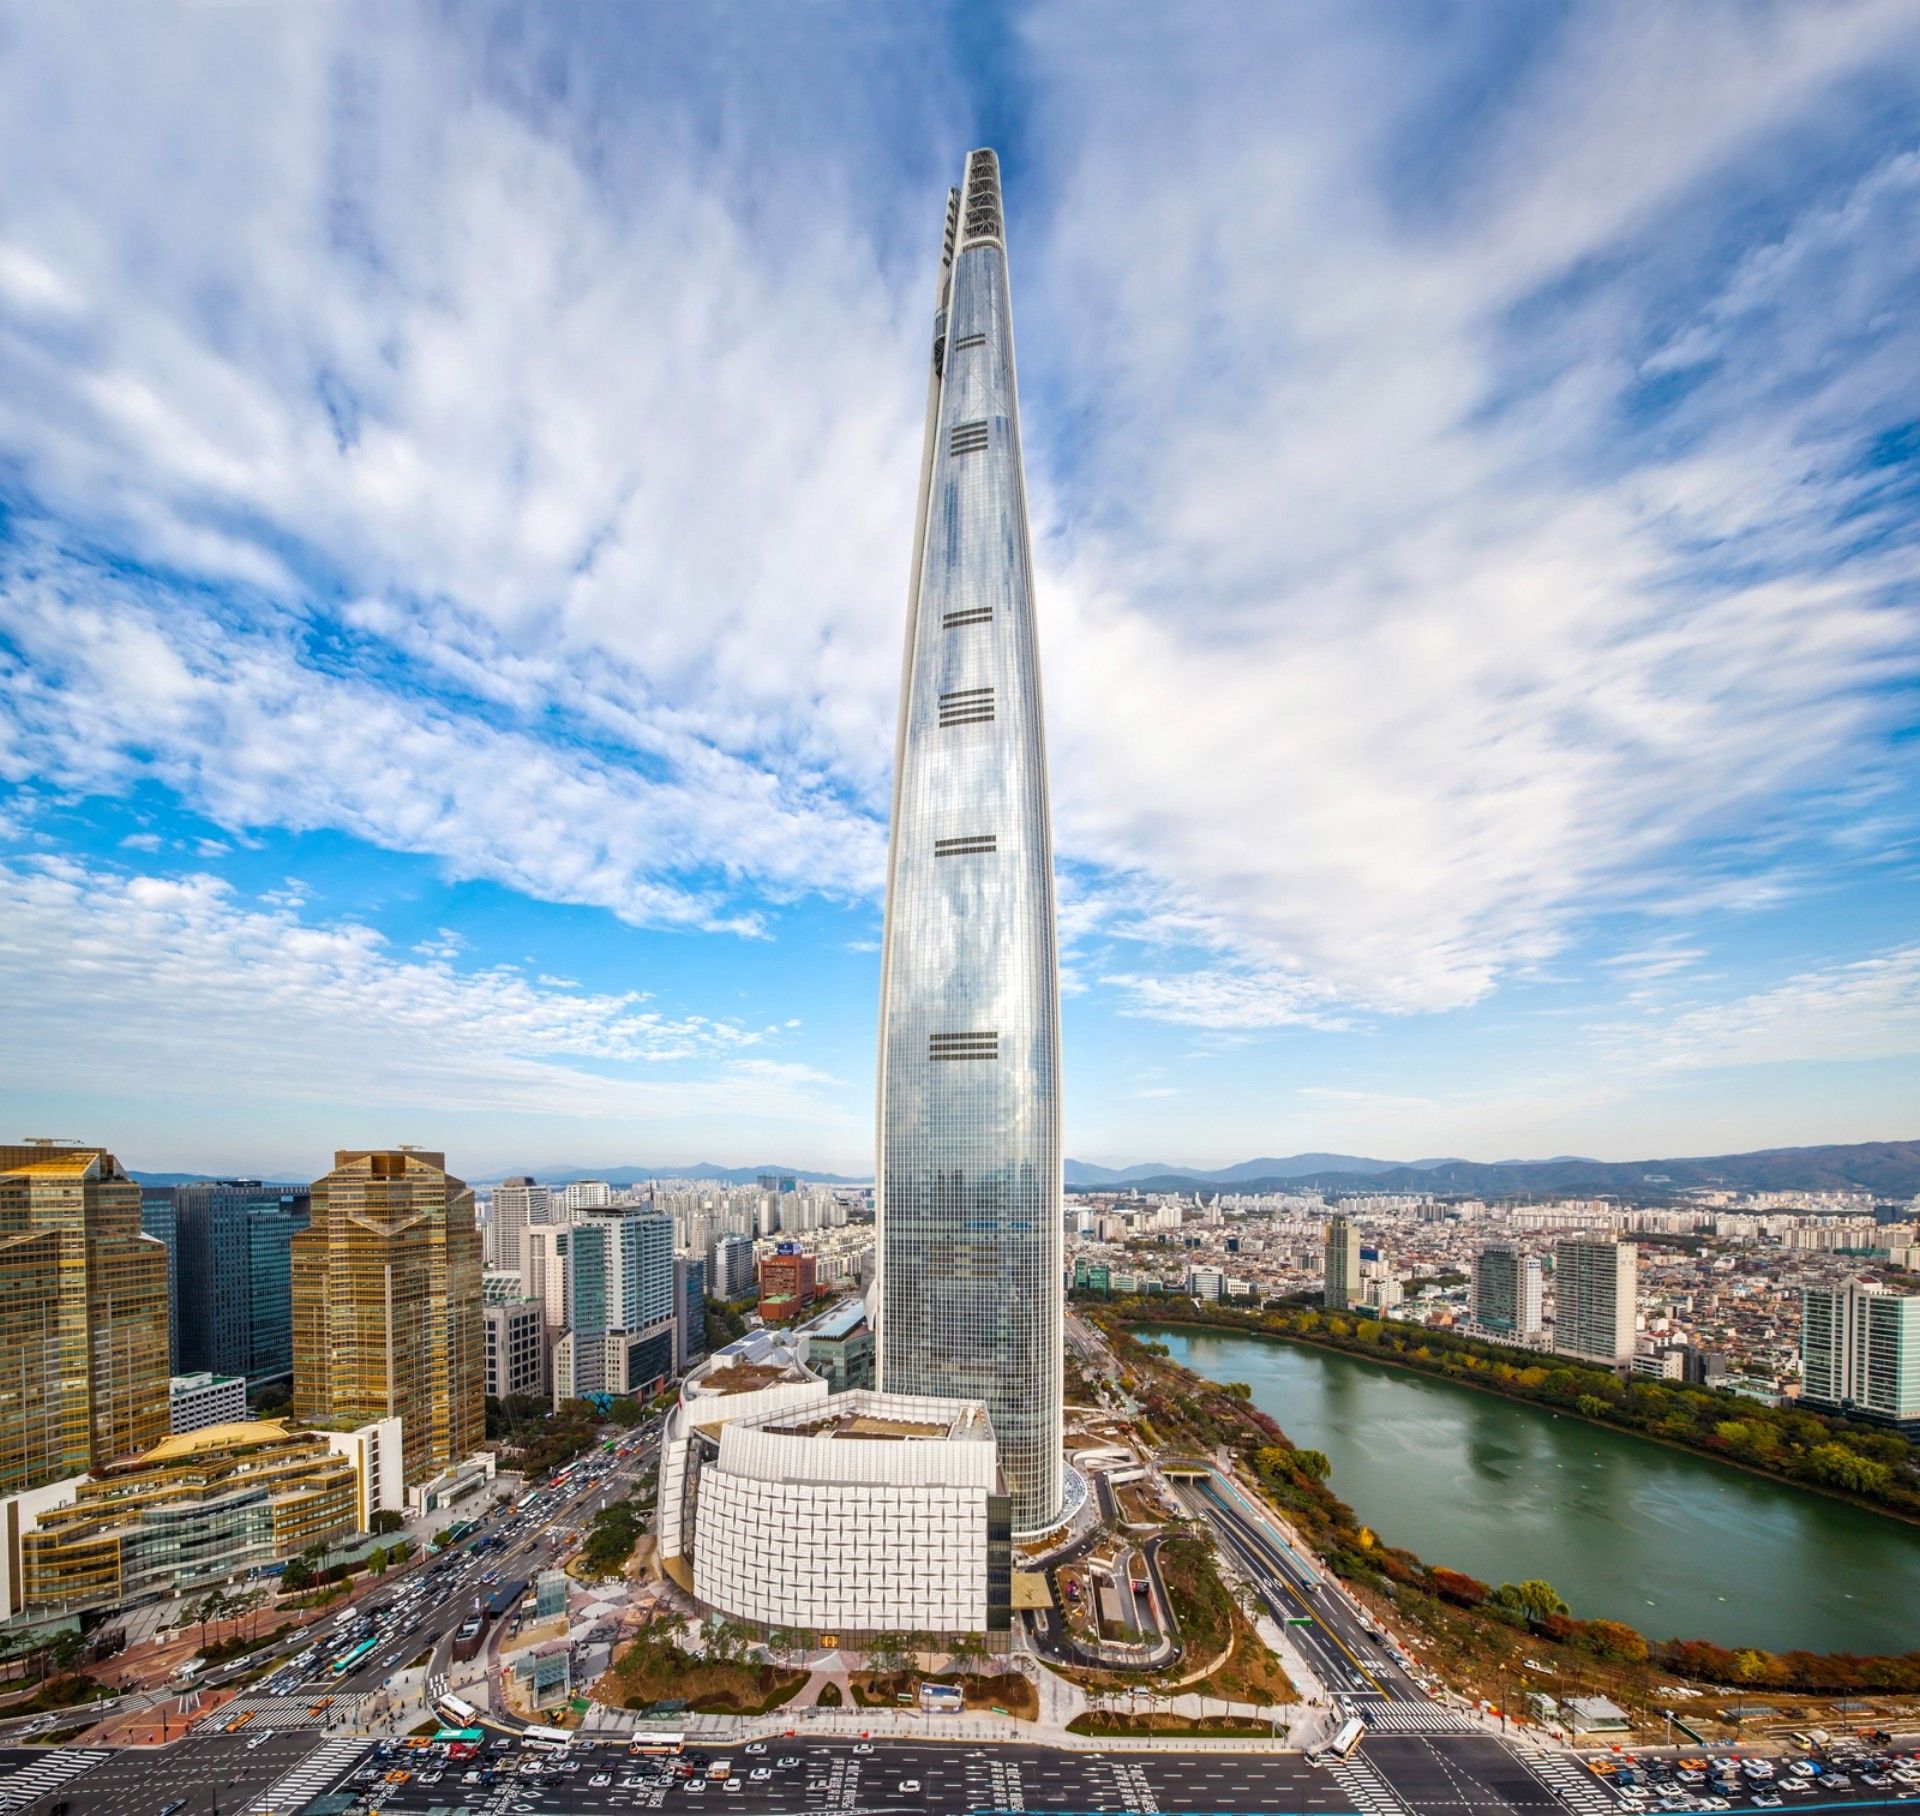 Lotte World Tower: the world's fifth tallest skyscraper is